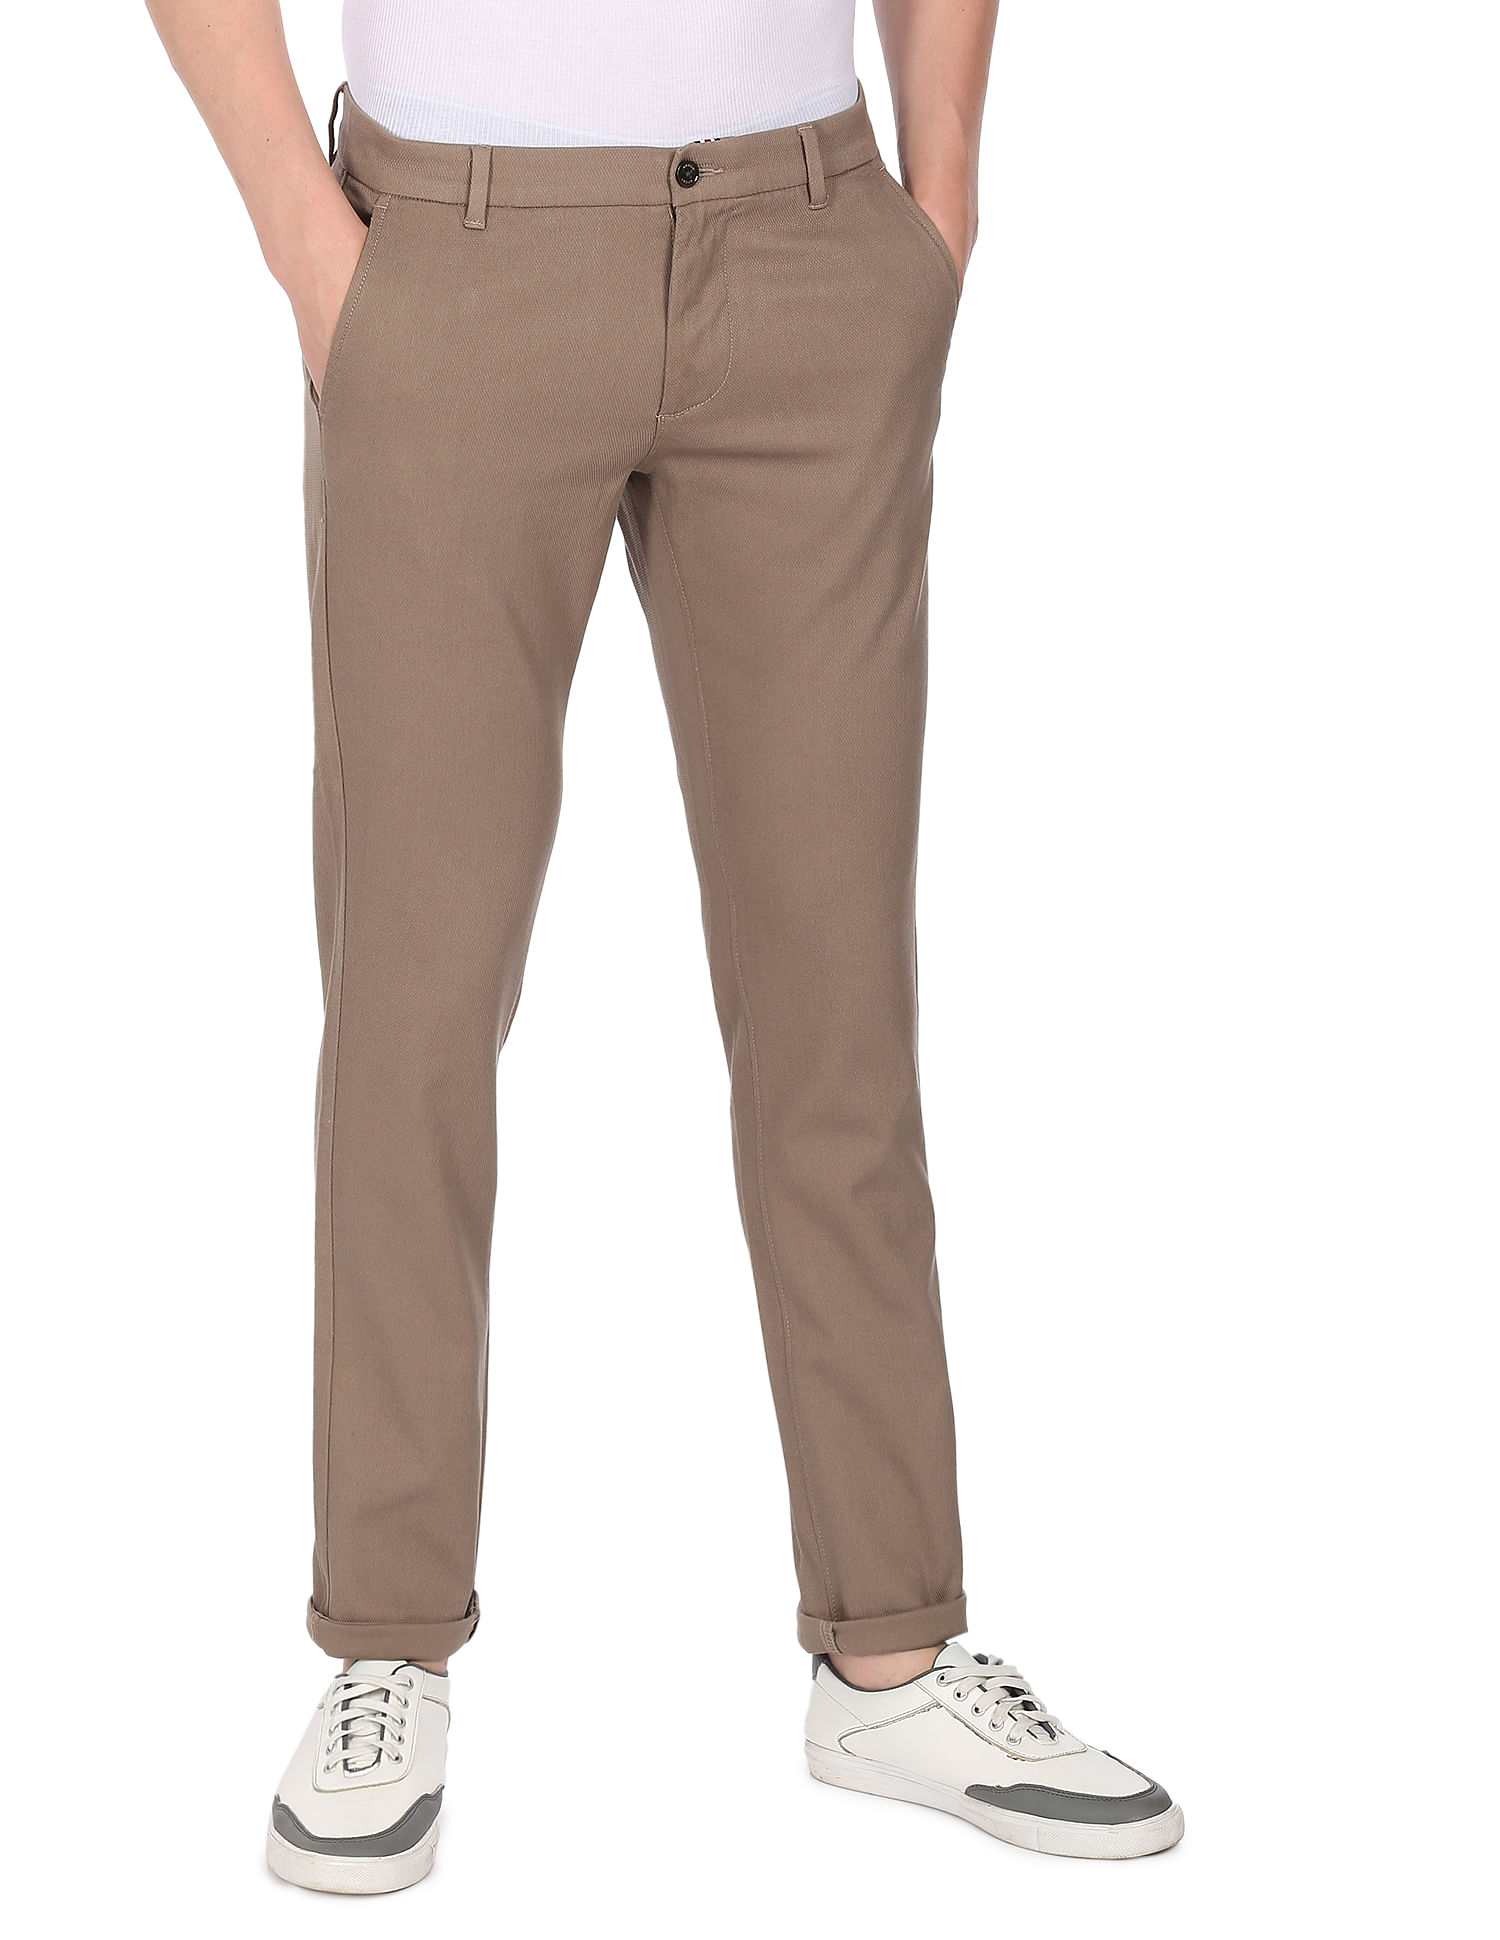 Buy United Colors Of Benetton Men Light Brown Slim Fit Chino Trousers   Trousers for Men 717579  Myntra